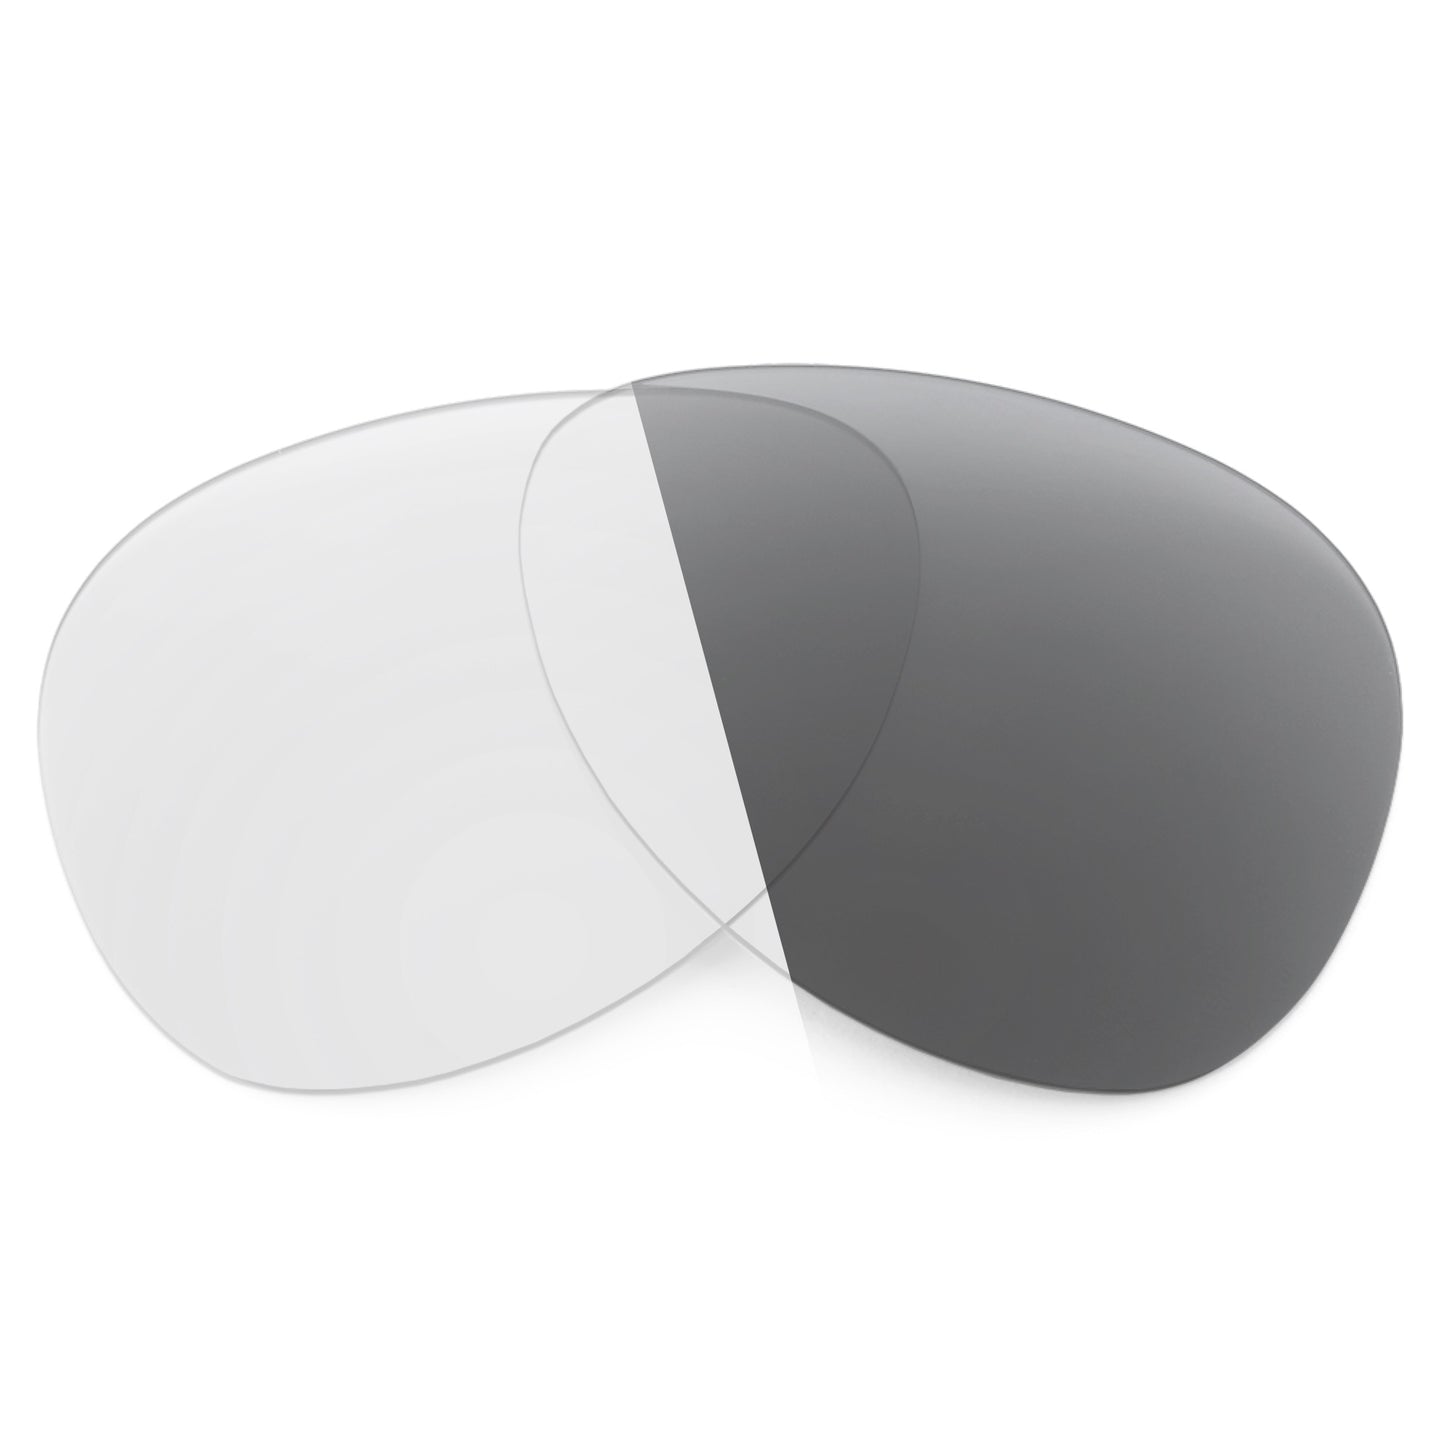 Revant replacement lenses for Costa Grand Catalina Non-Polarized Adapt Gray Photochromic